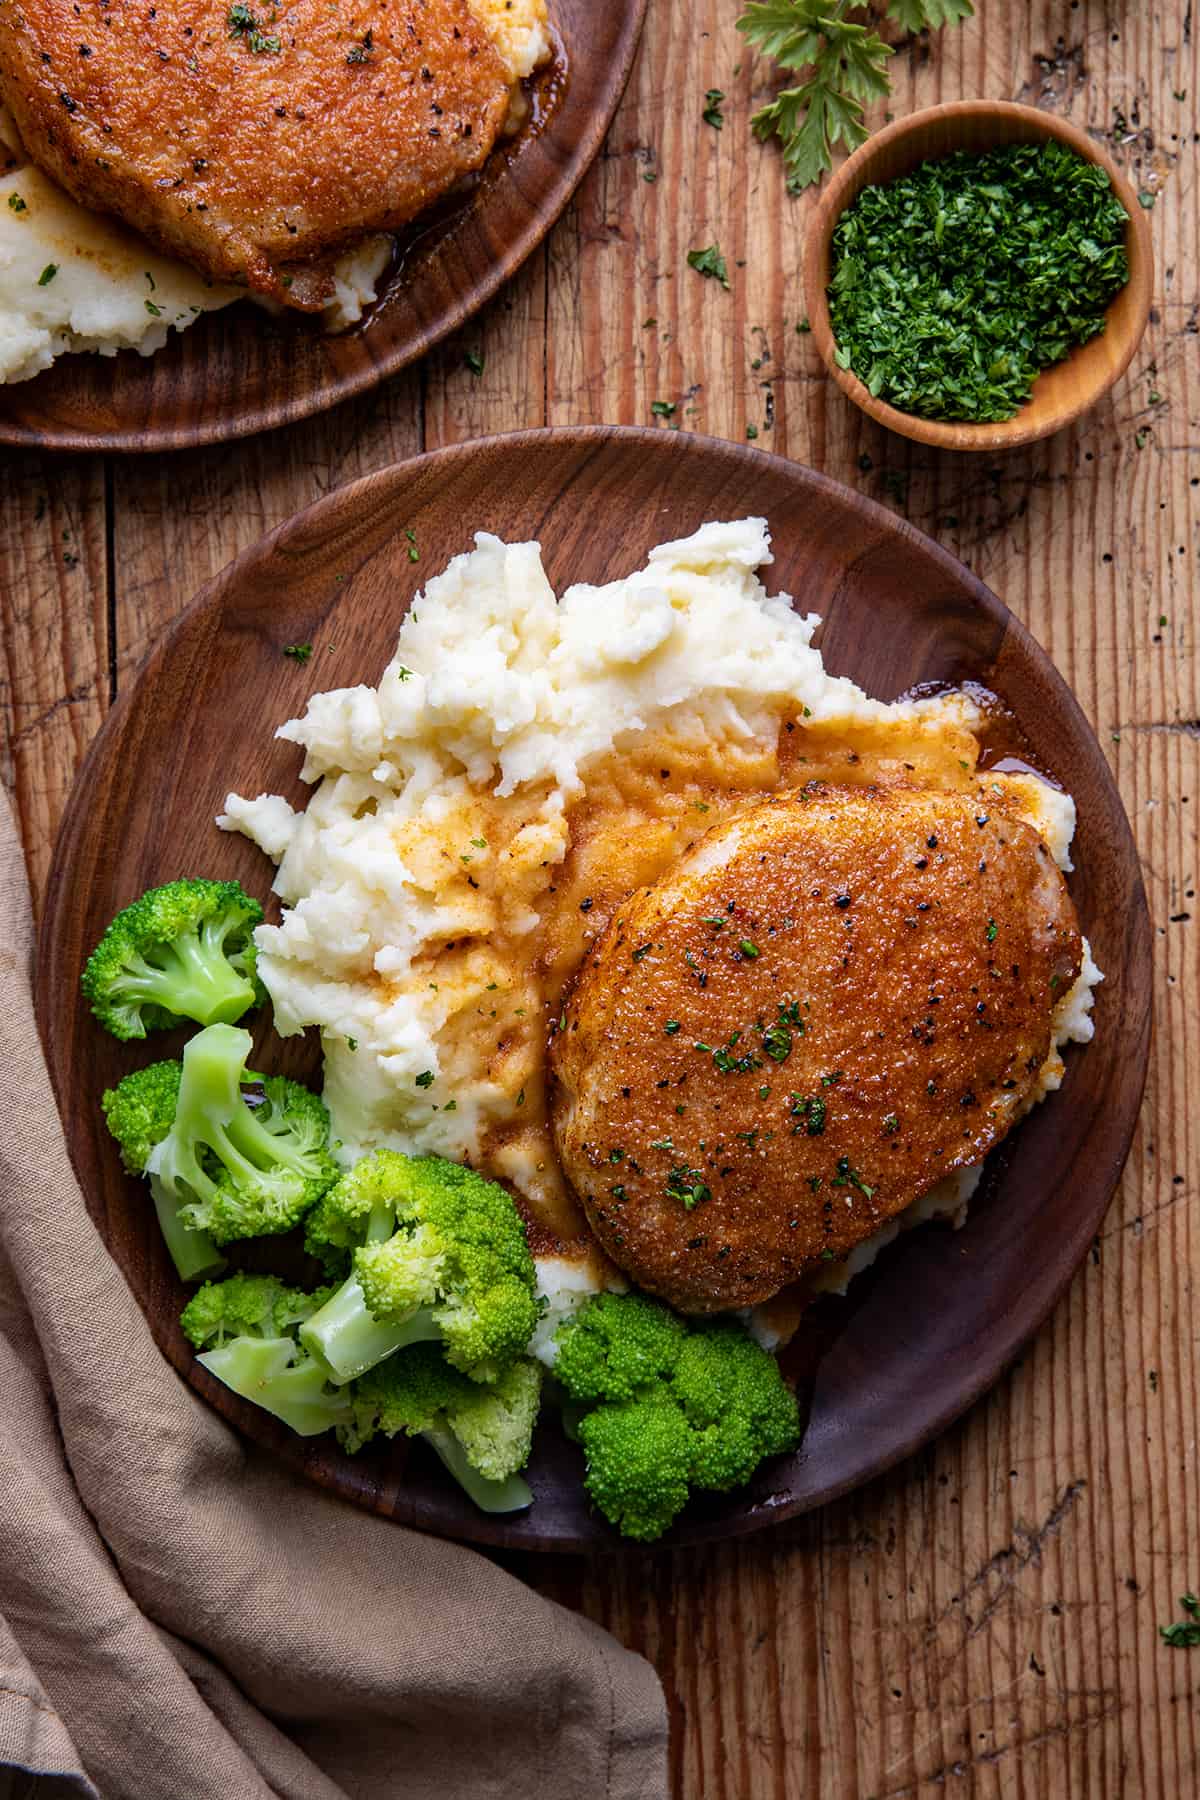 Baked Pork Chops on a bed of mashed potatoes and broccoli on a wooden table.